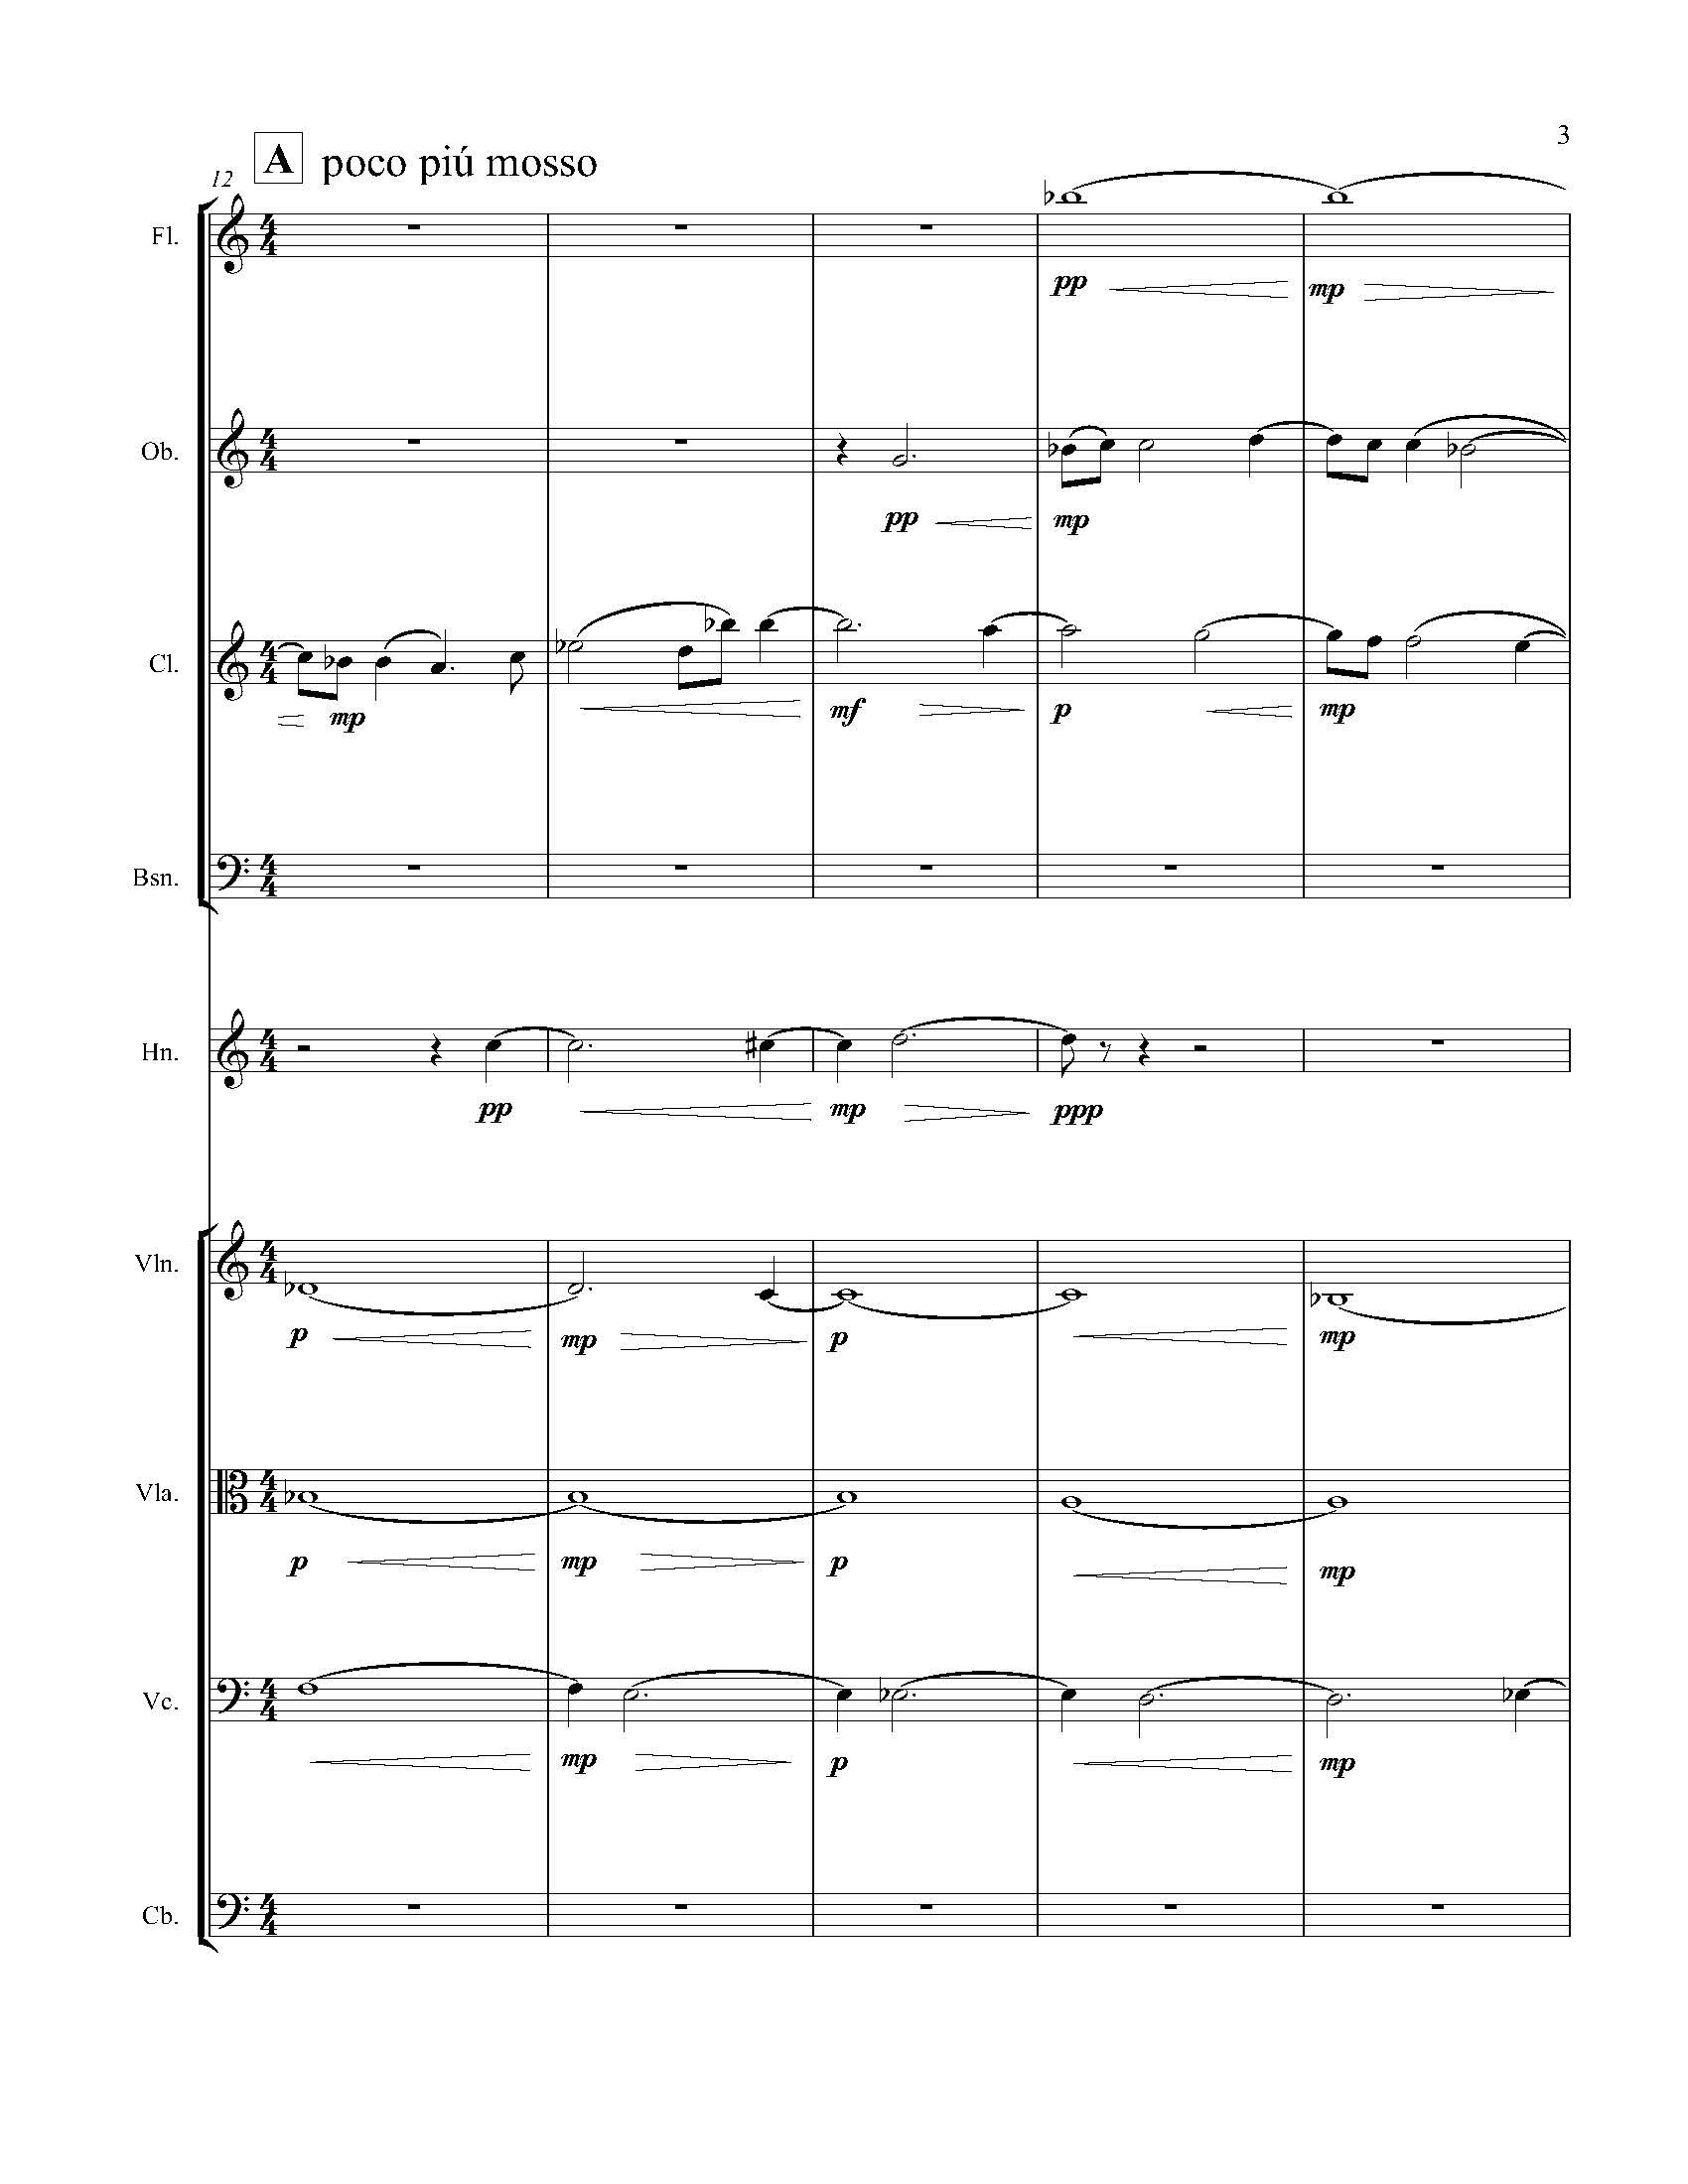 In Search of a Bird - Complete Score_Page_09.jpg